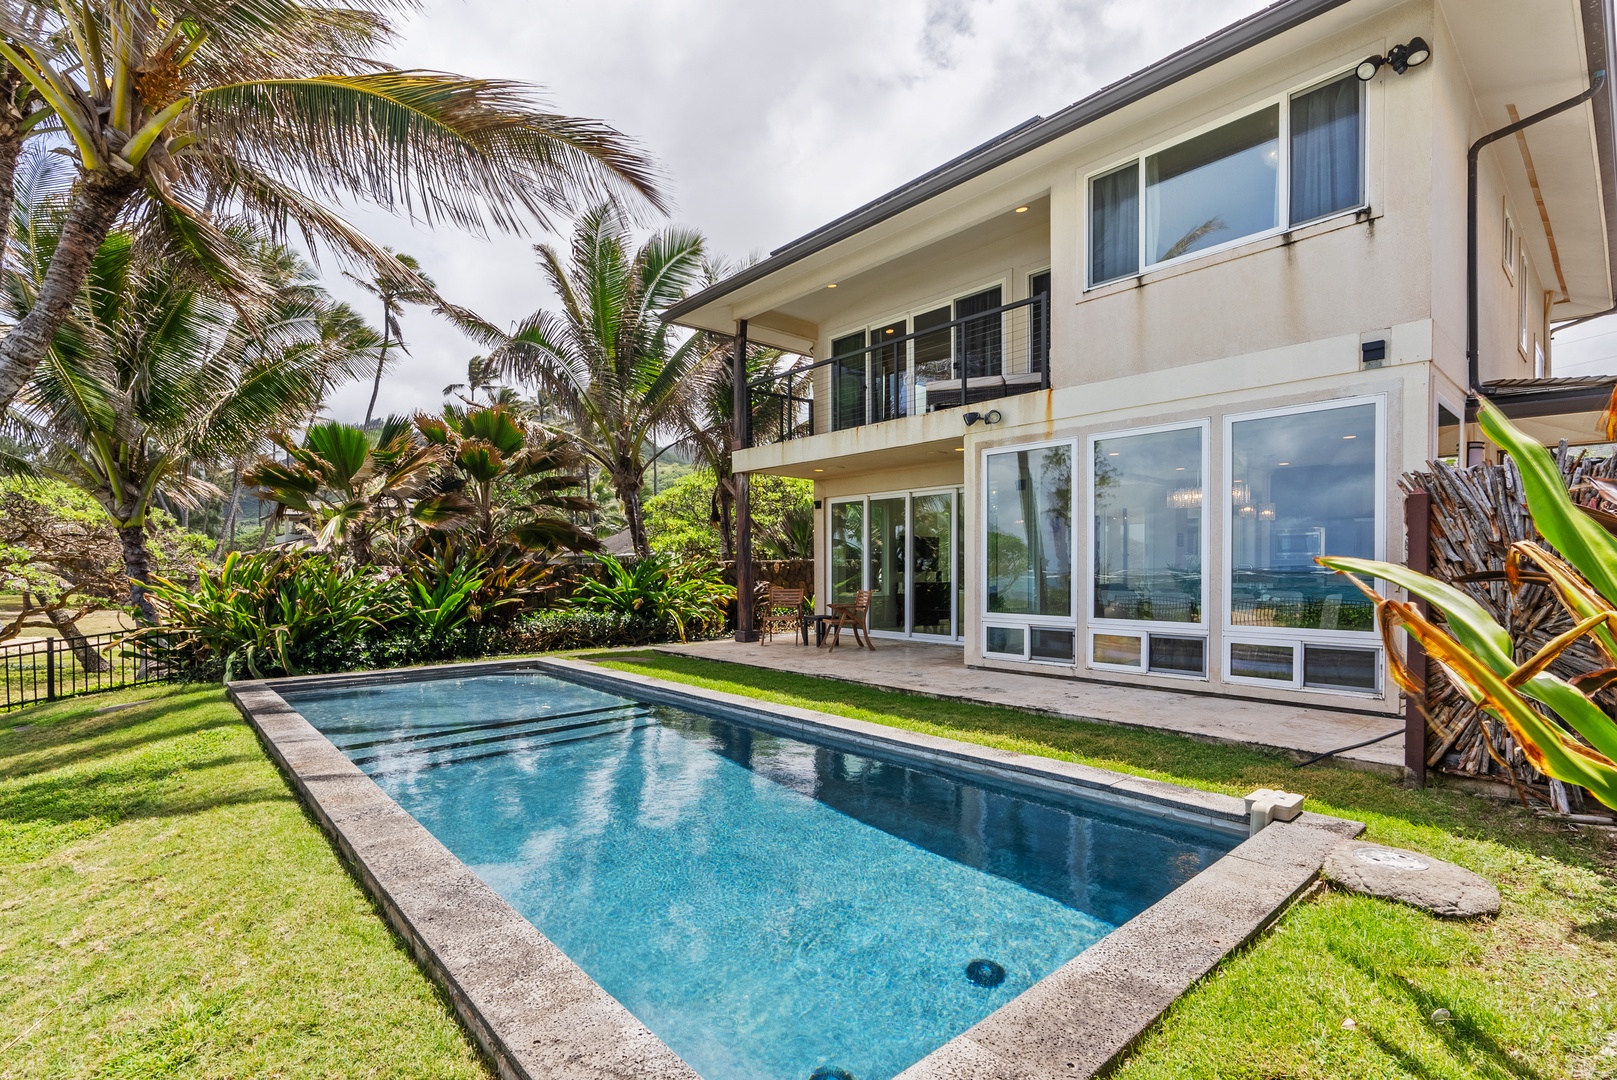 Laie Vacation Rentals, Laie Beachfront Estate - Take a plunge in the pool and beat the summer heat.